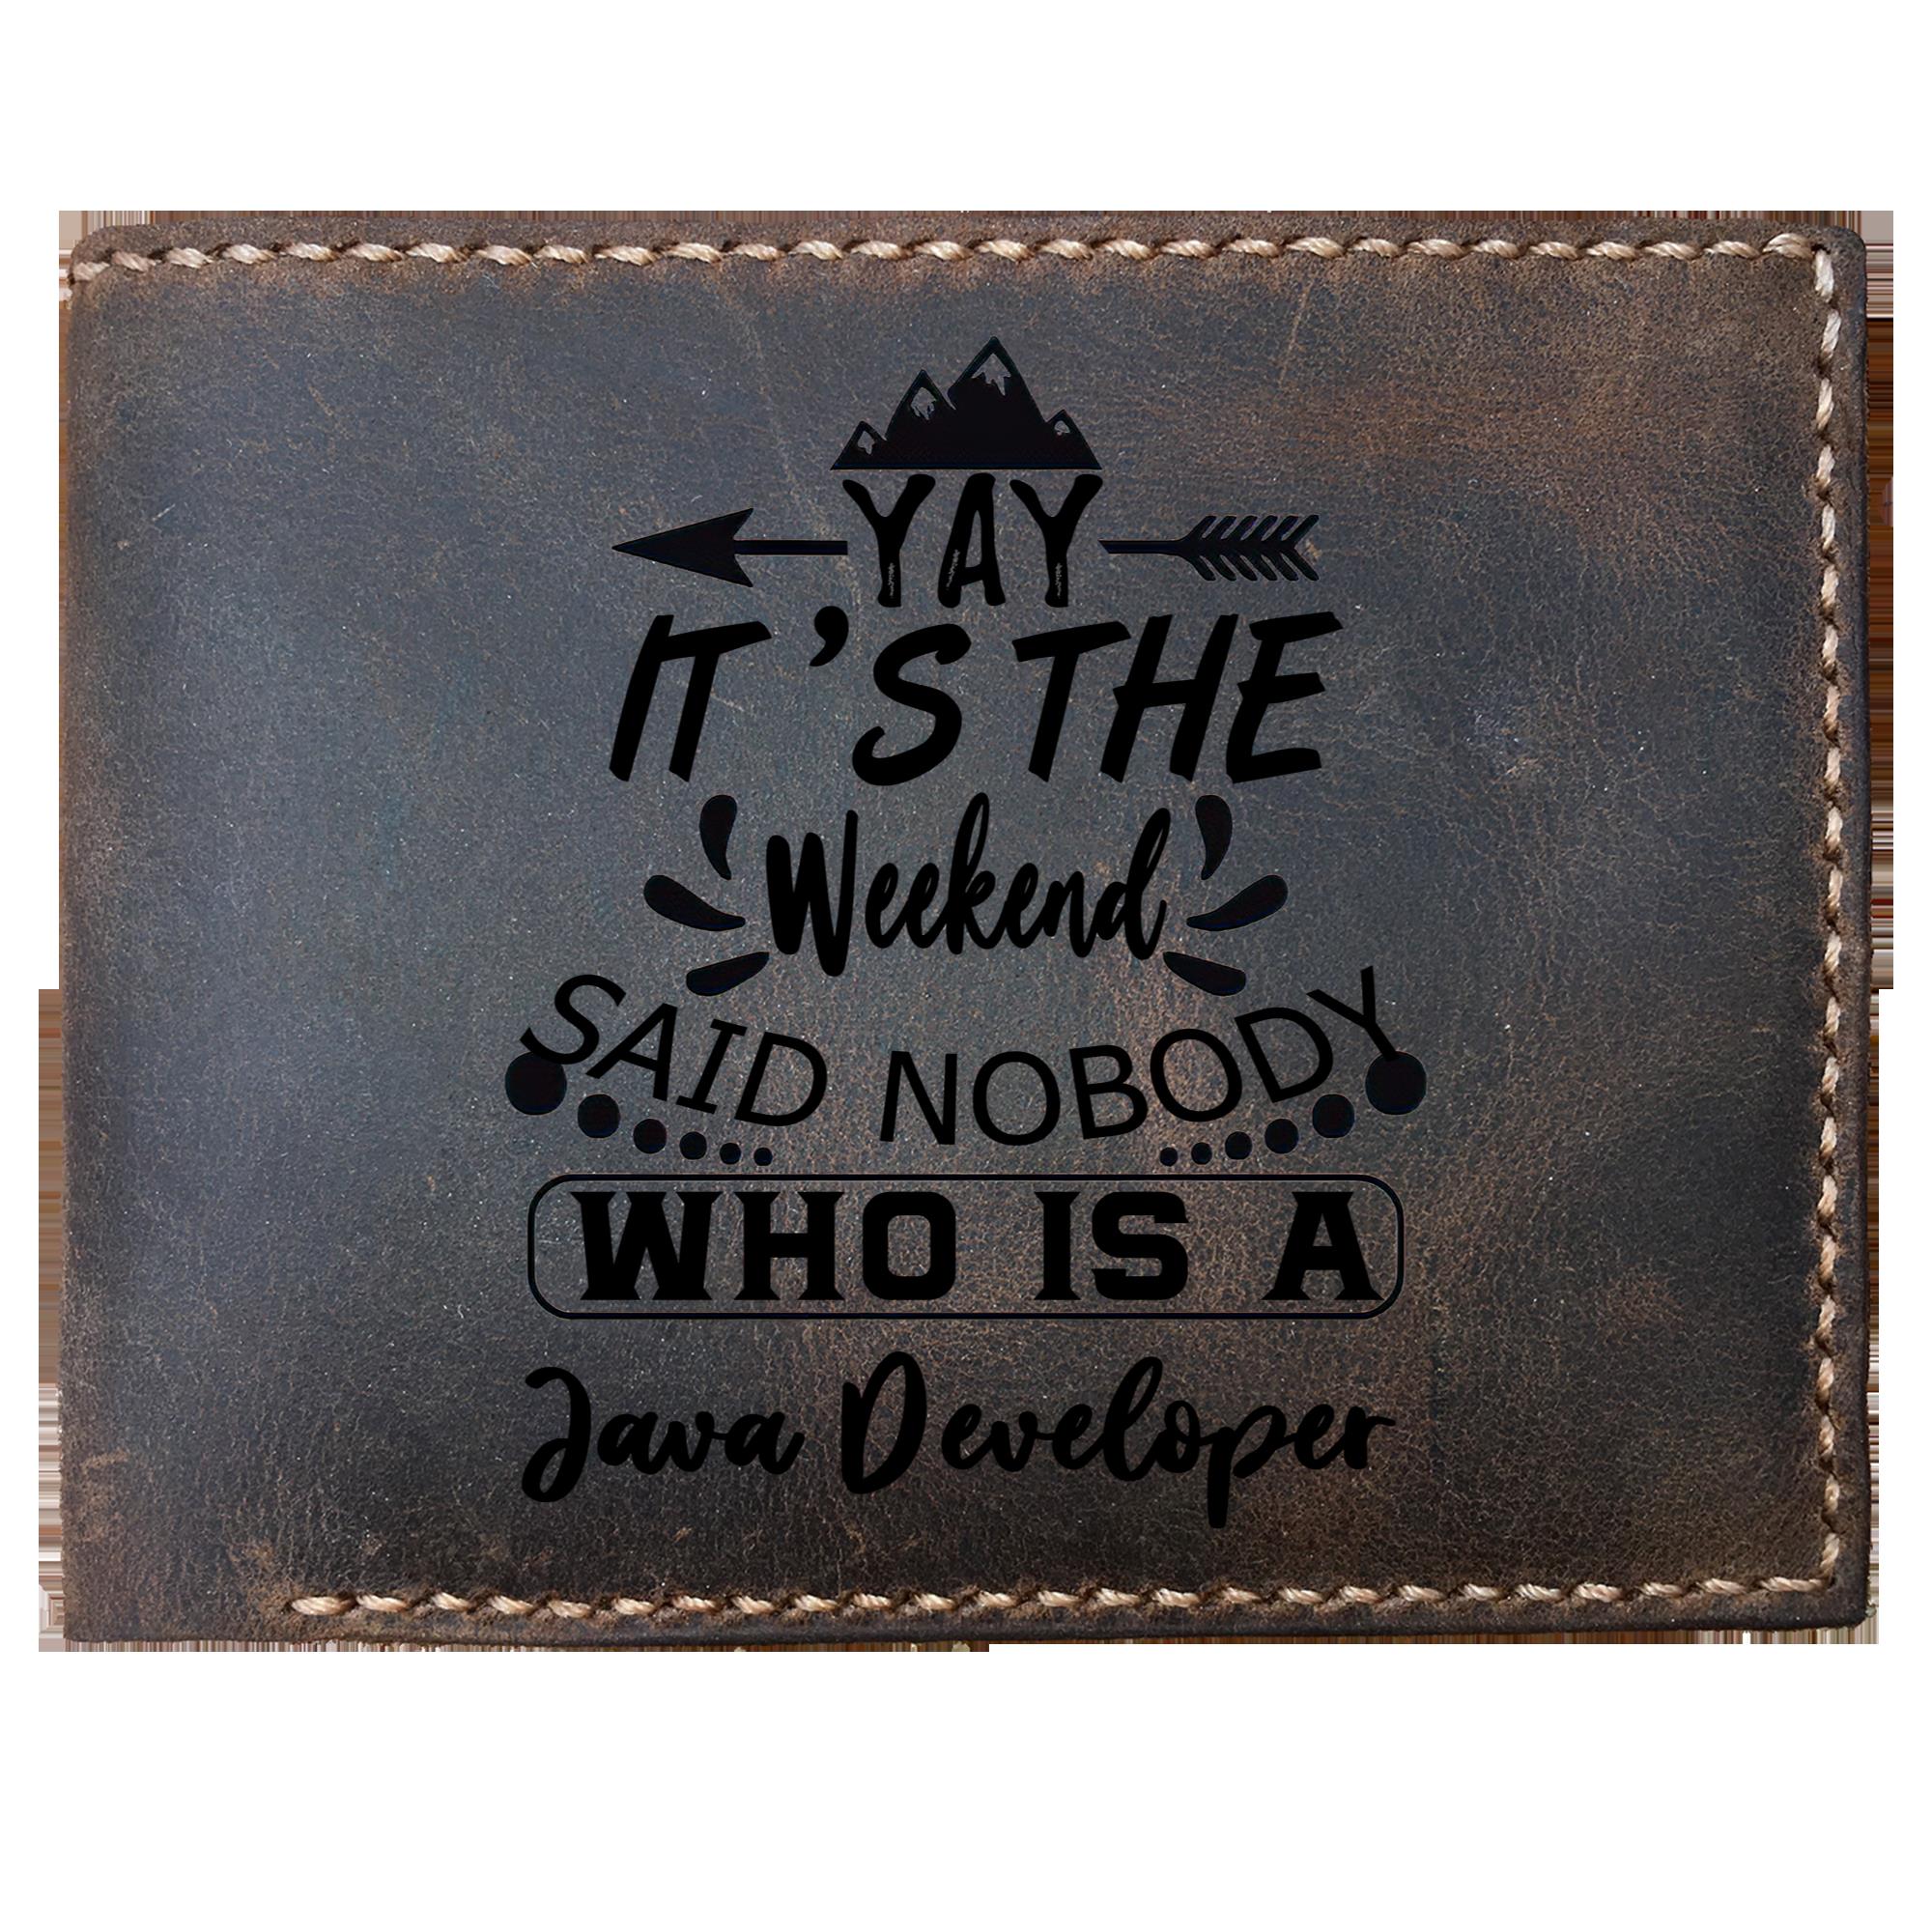 Skitongifts Funny Custom Laser Engraved Bifold Leather Wallet For Men, It's The Weekend Said Nobody Who Is A Java Developer, Father's Day Gifts